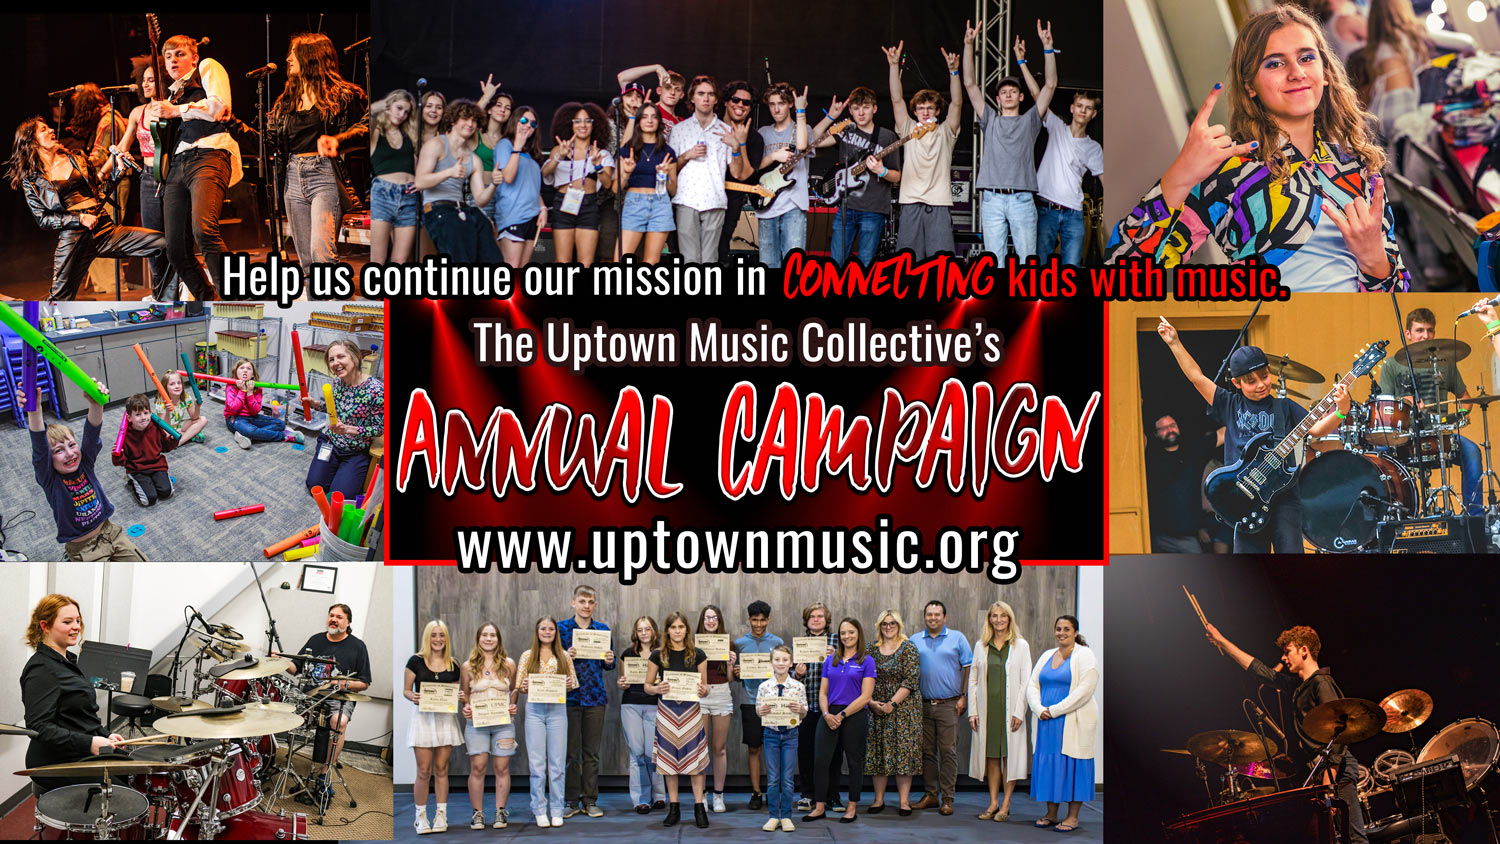 The Uptown Music Collective's Annual Campaign for 2023-2024.